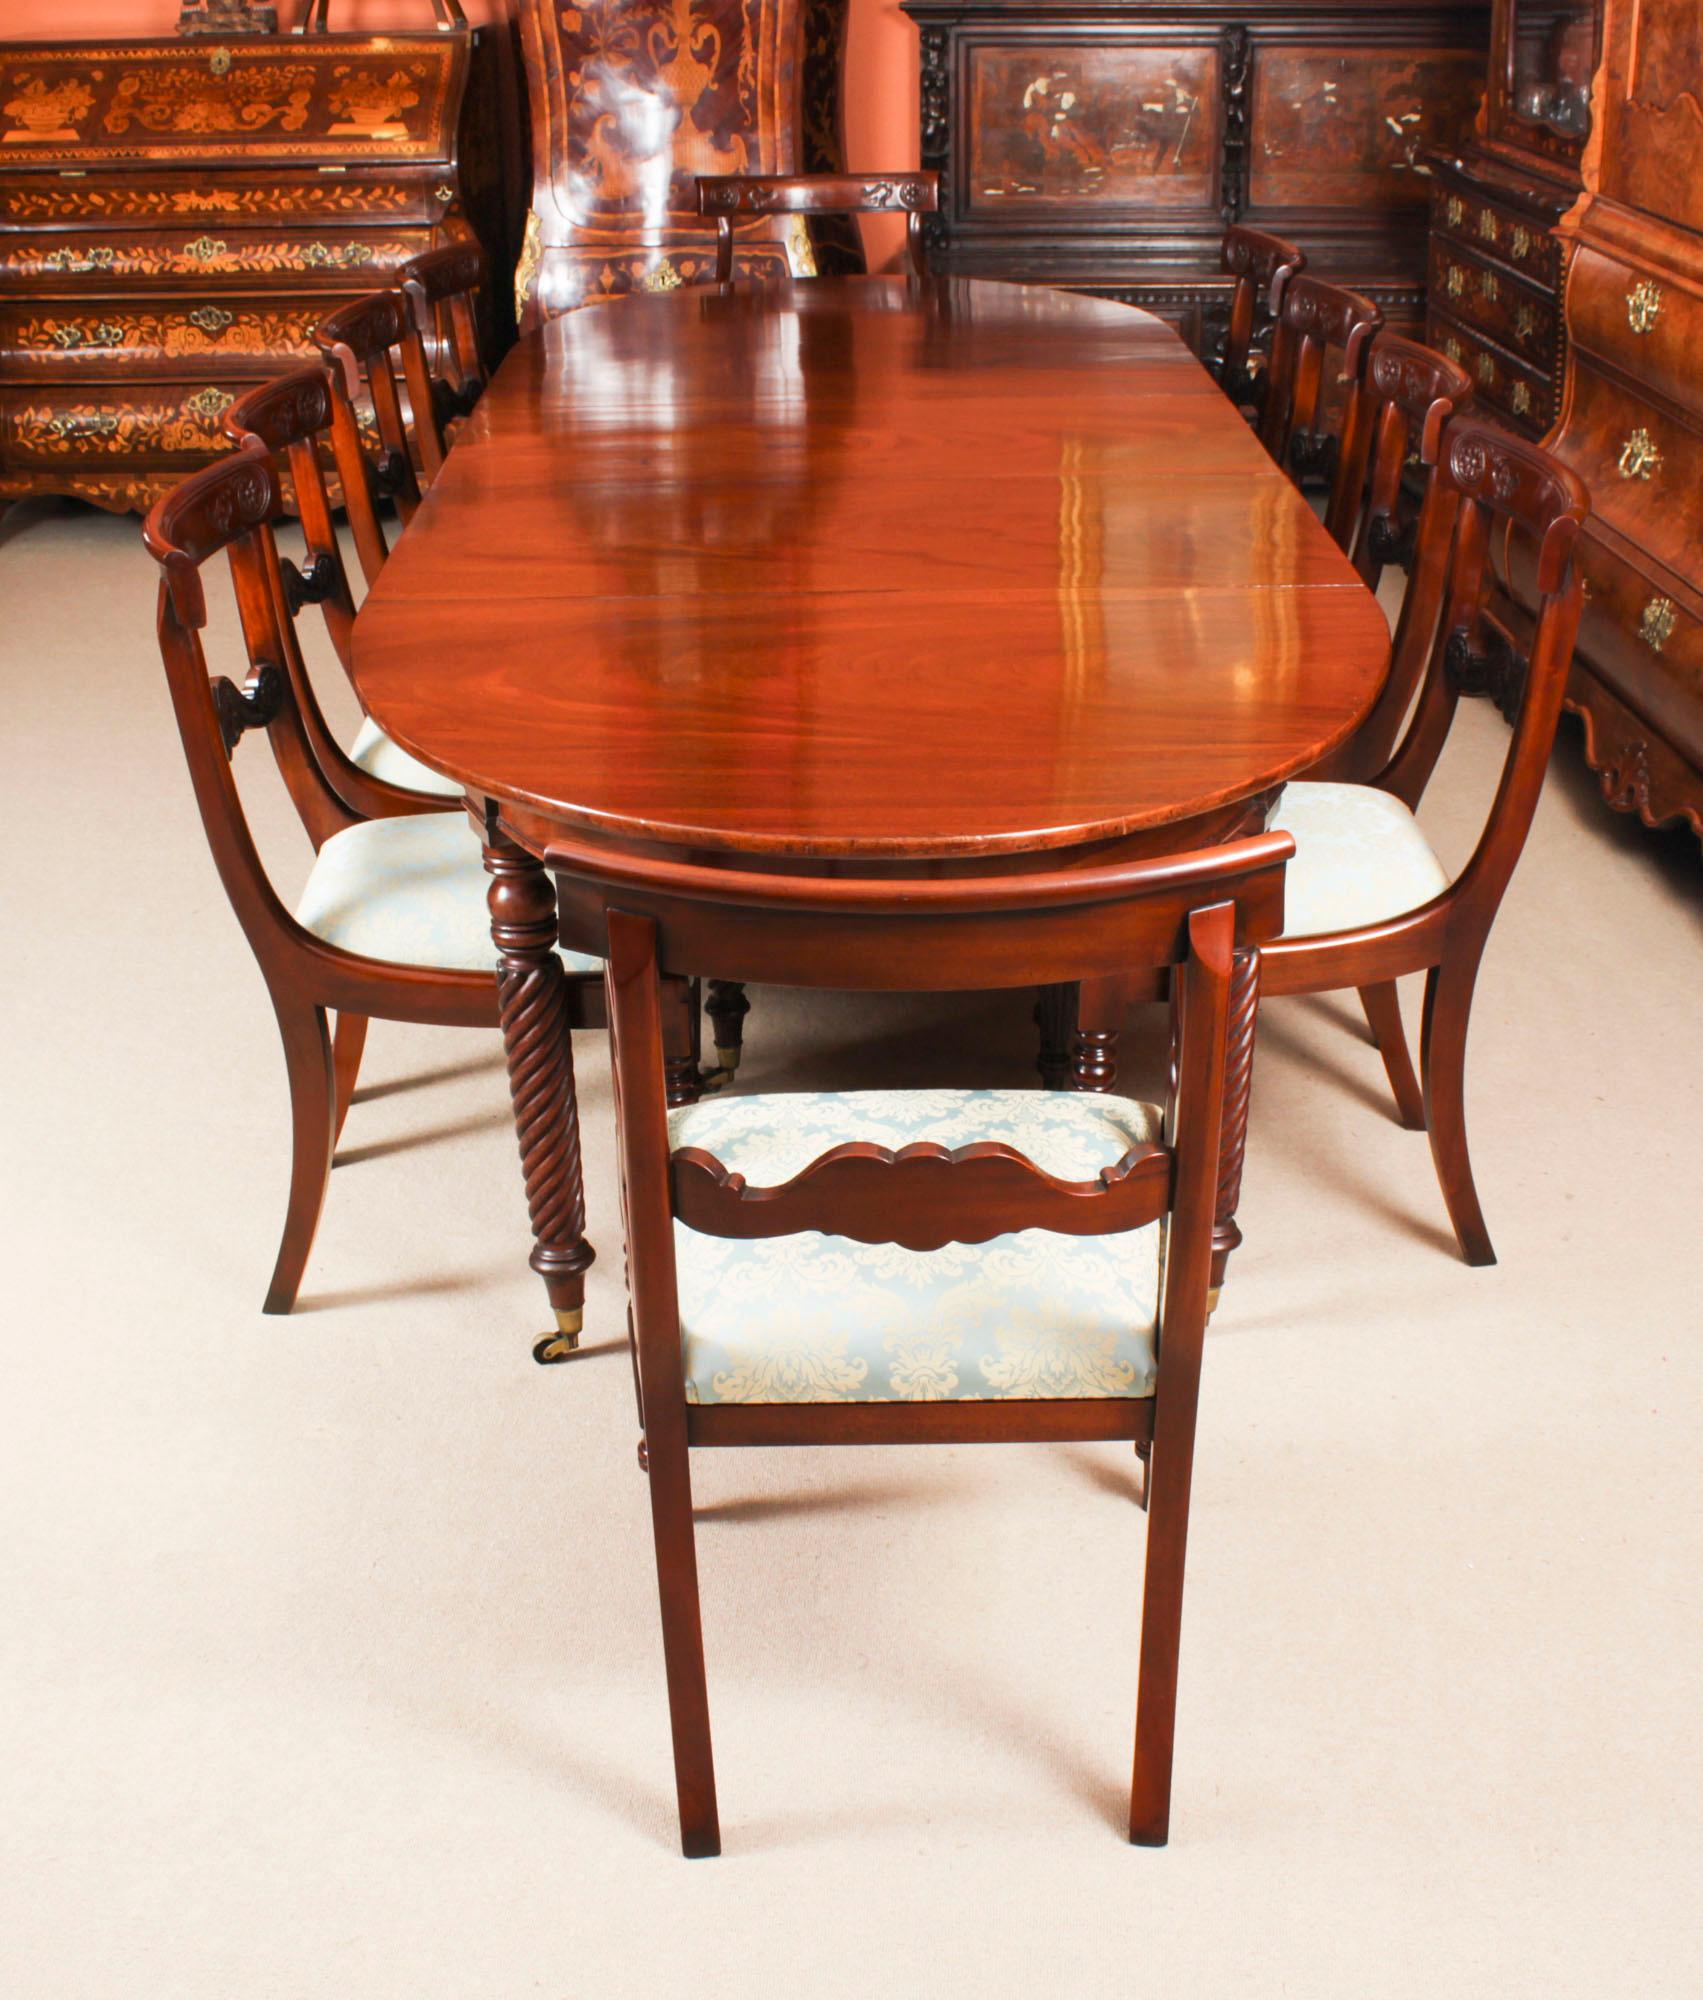 A very rare opportunity to own a fabulous dining set comprising an antique Regency Period dining table Citca 1820in date and a set of ten  Regency Revival bar back dining chairs.

The extremely rare Regency Period Wilkinson Patent concertina action